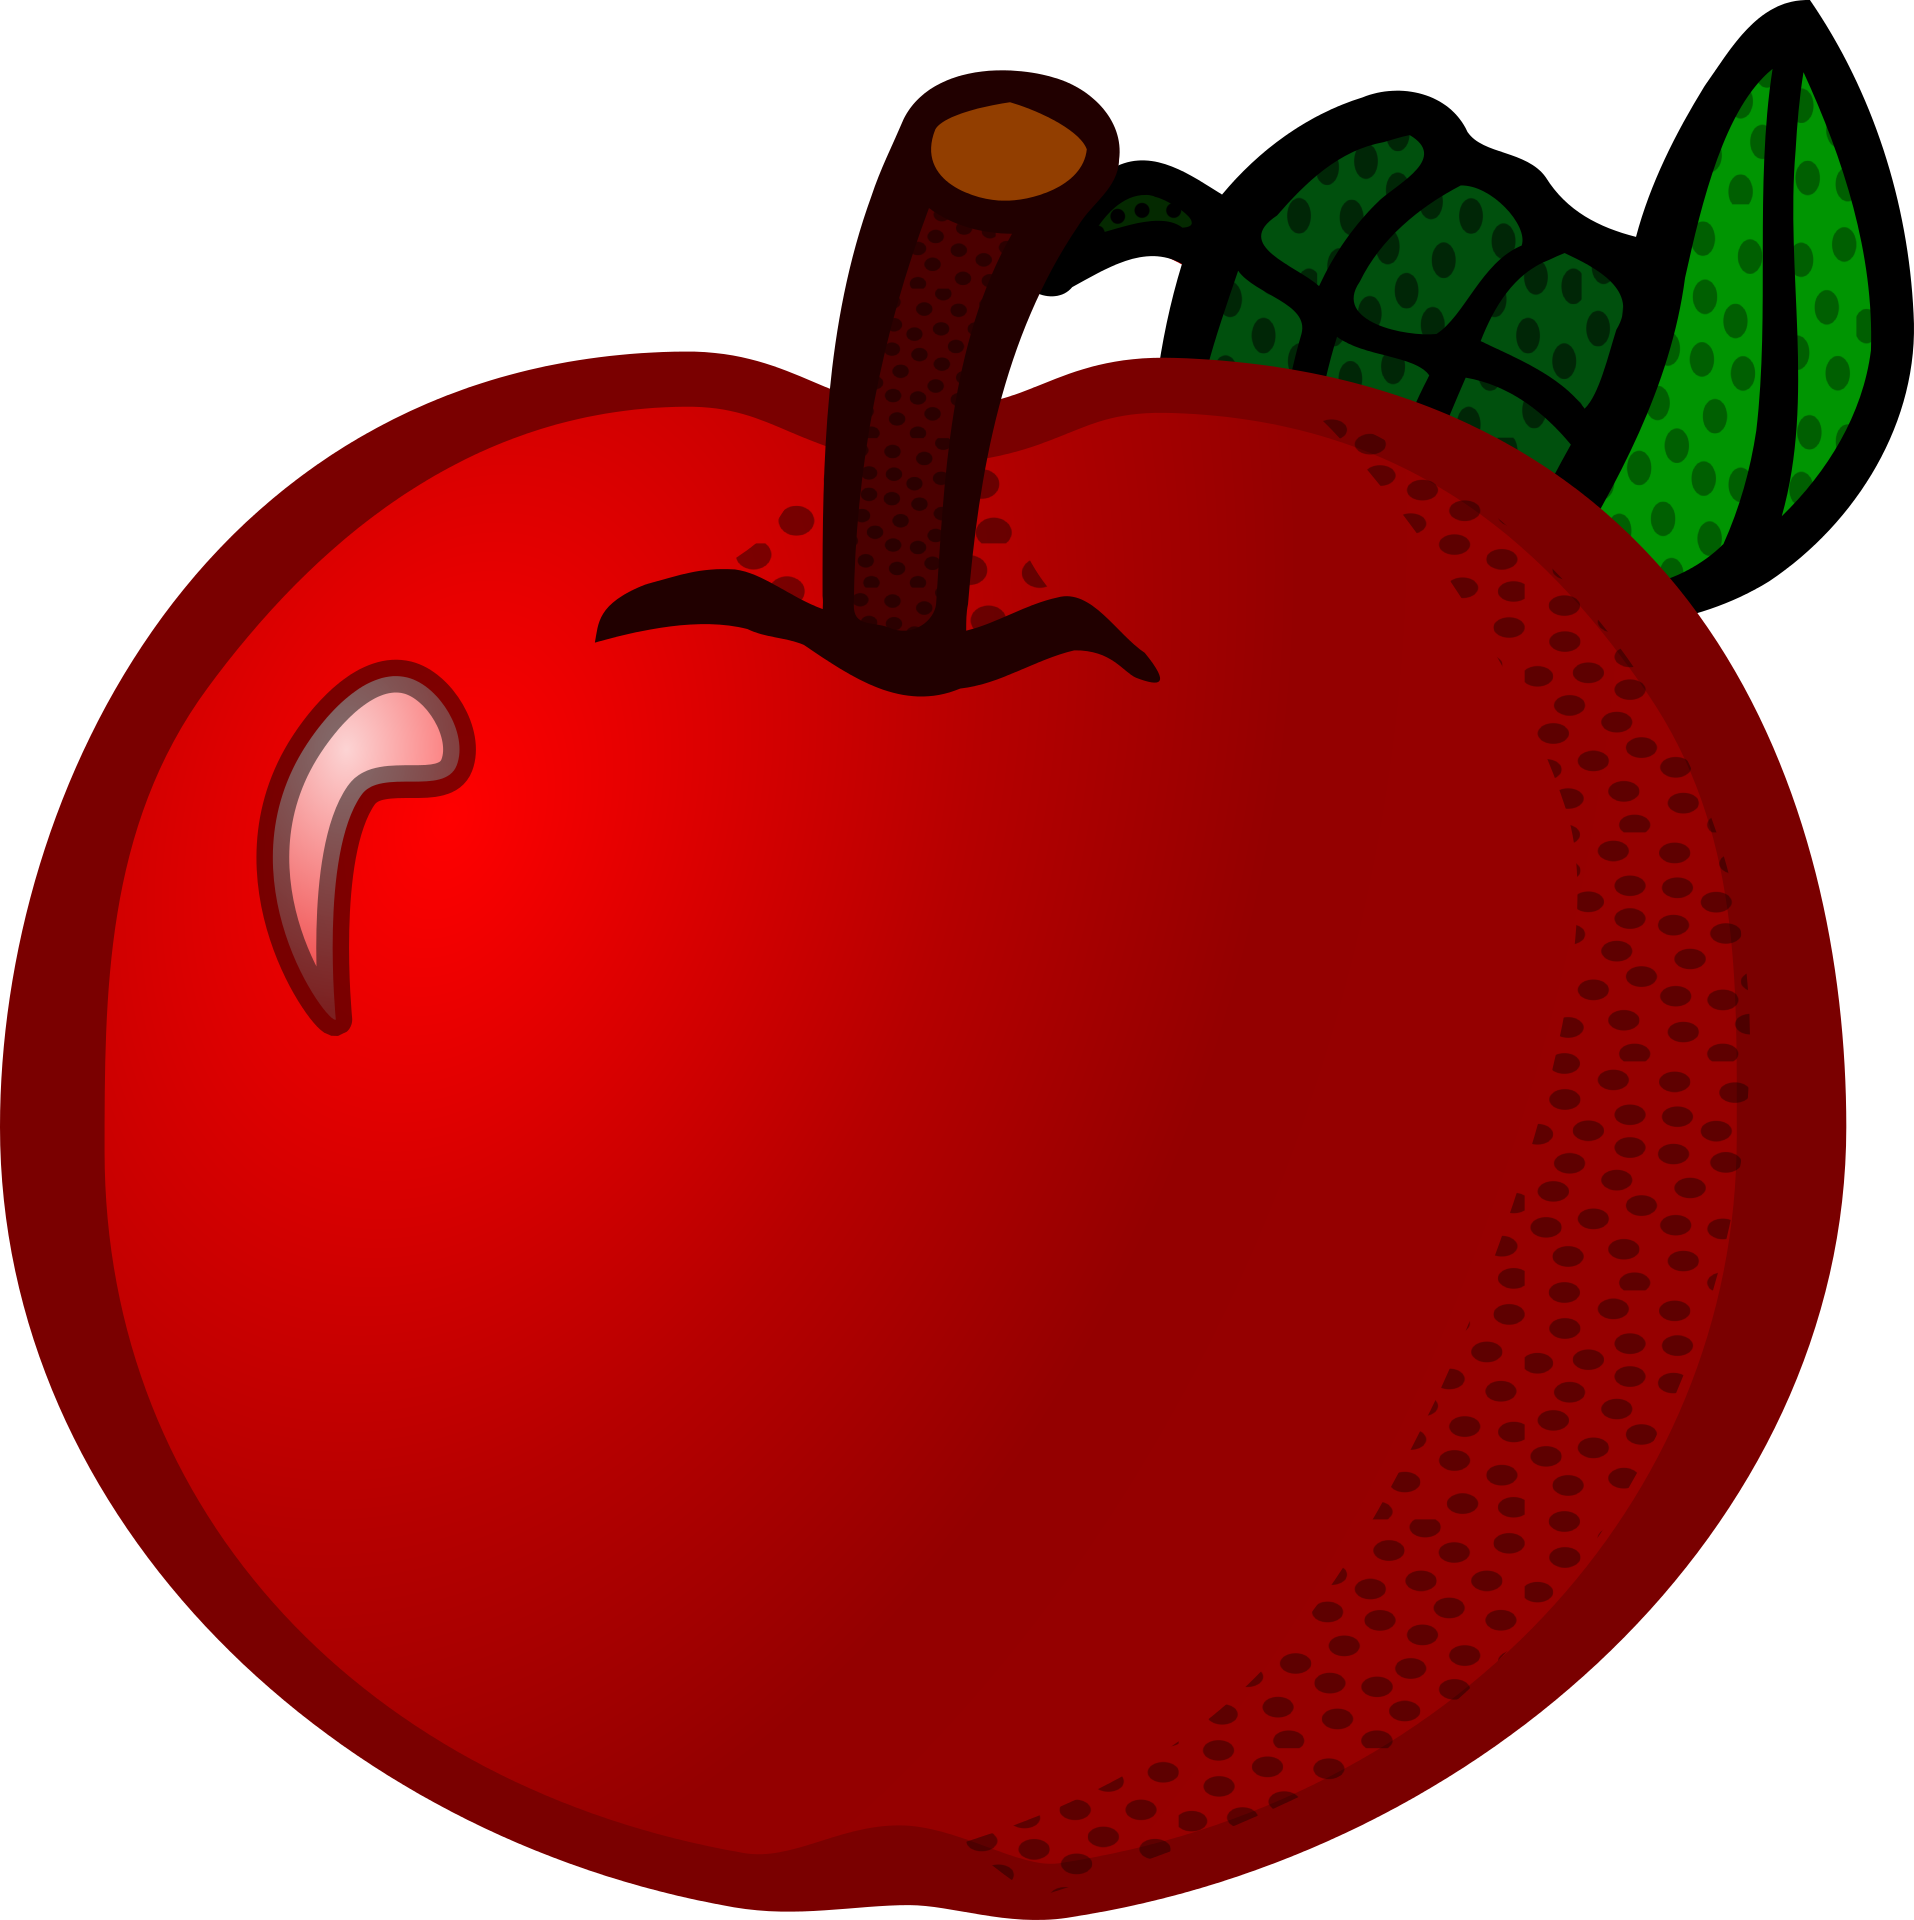 Drawing of a red apple free image download